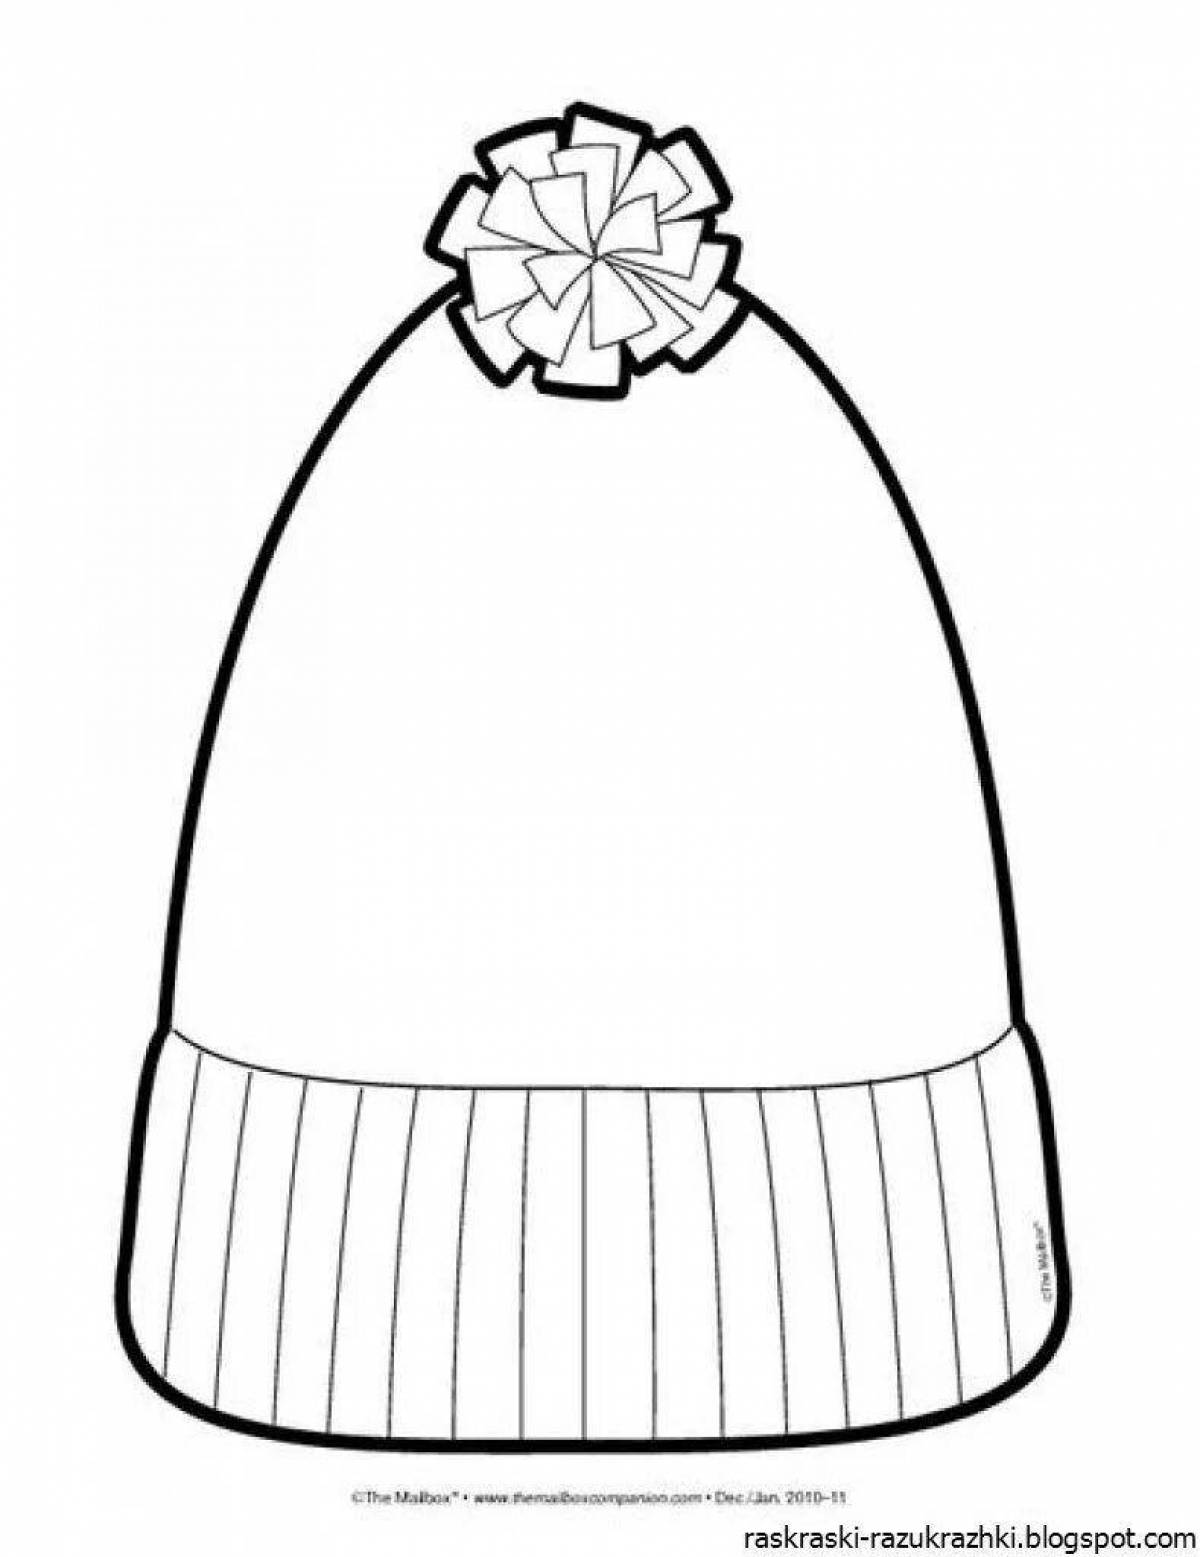 Colorful winter hat coloring book for kids